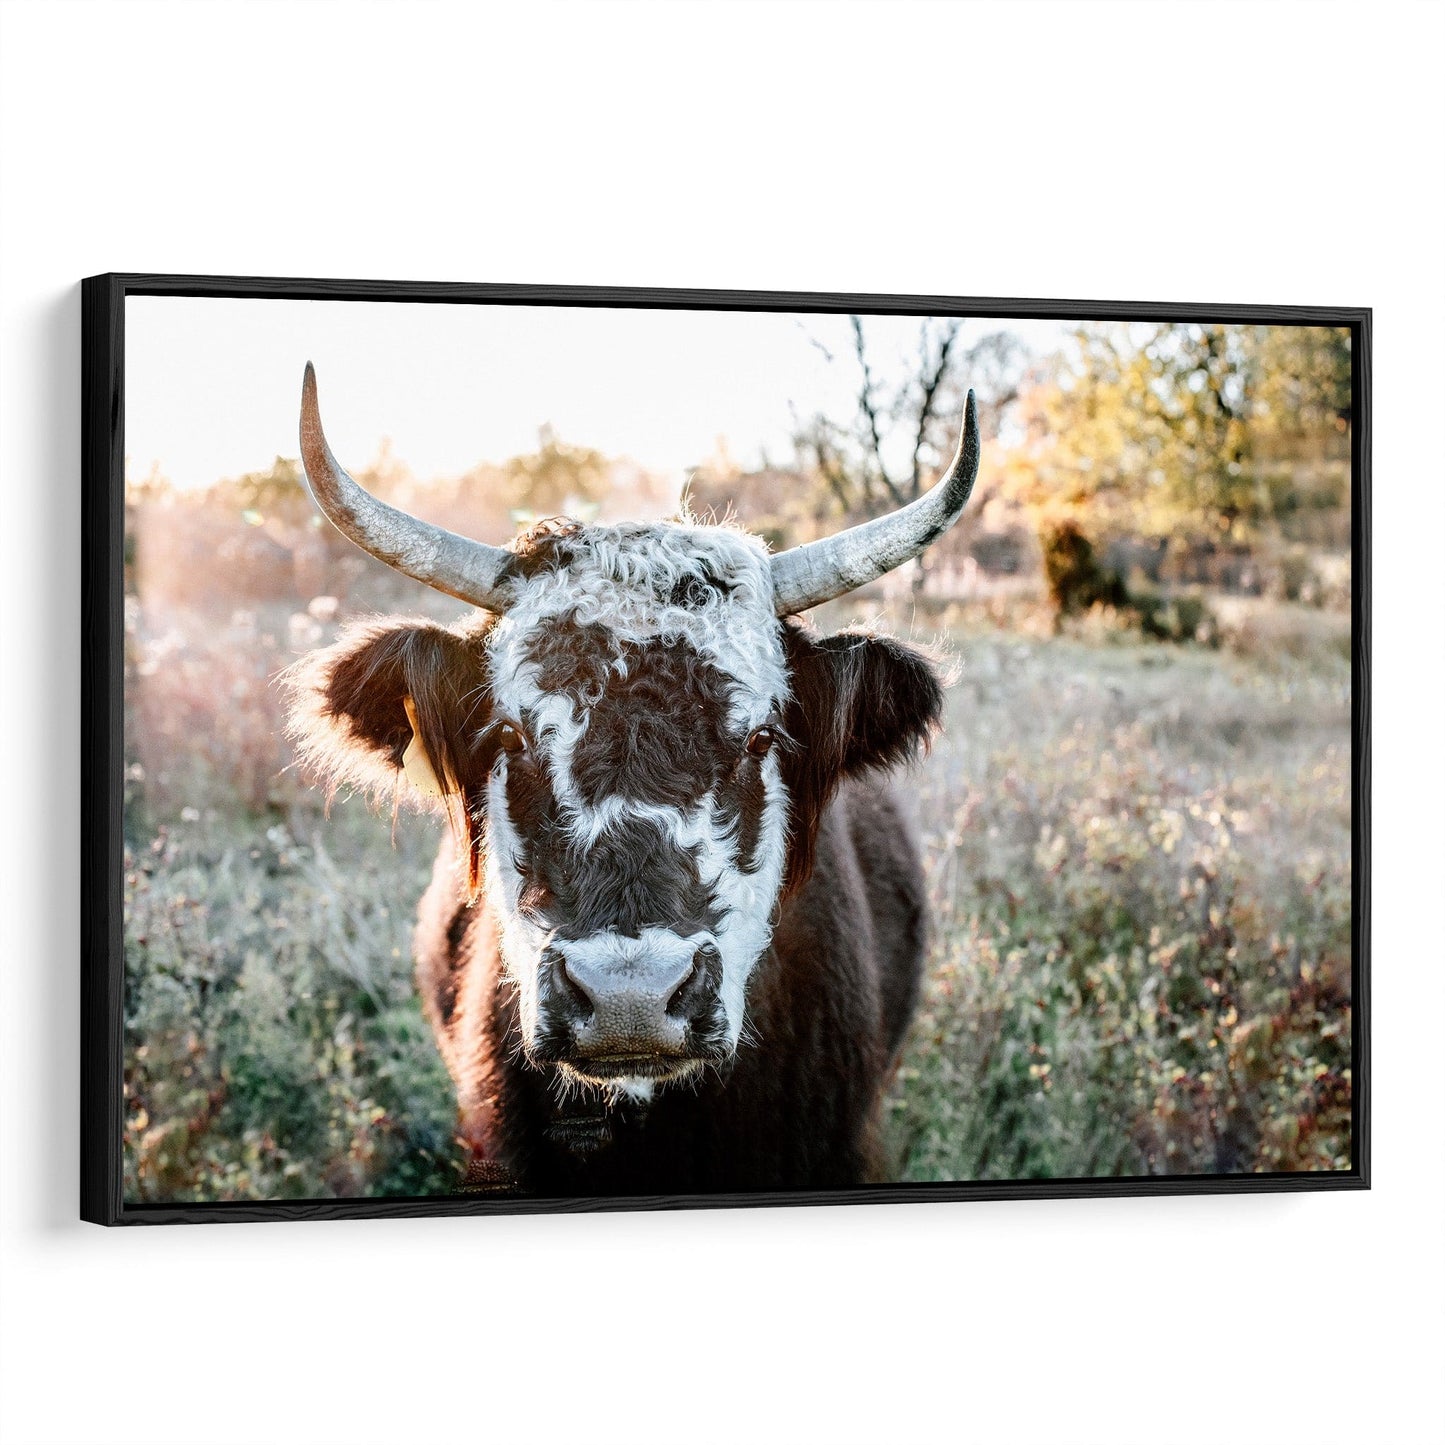 Highland Cow Canvas Print - Black and White Cow Canvas-Black Frame / 12 x 18 Inches Wall Art Teri James Photography